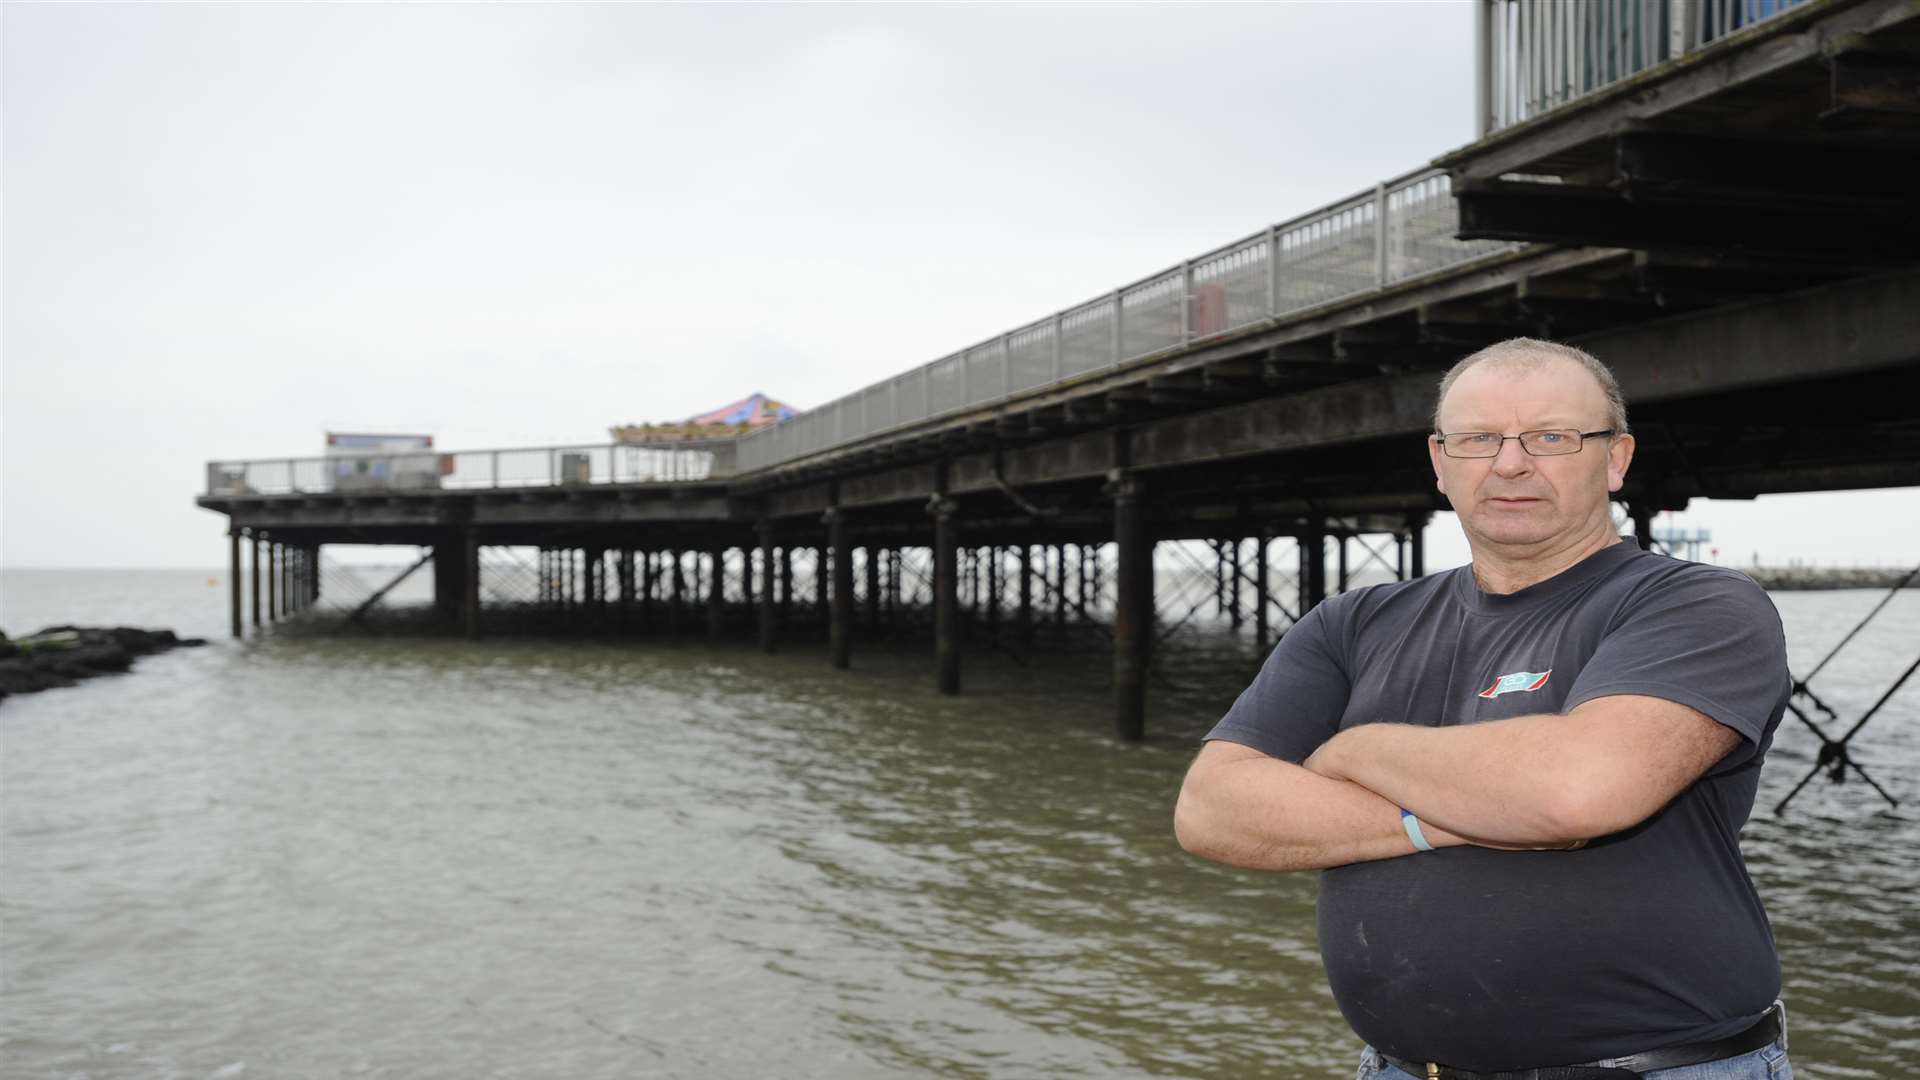 Herne Bay pier is said to need renovation work, according to Andy Newell